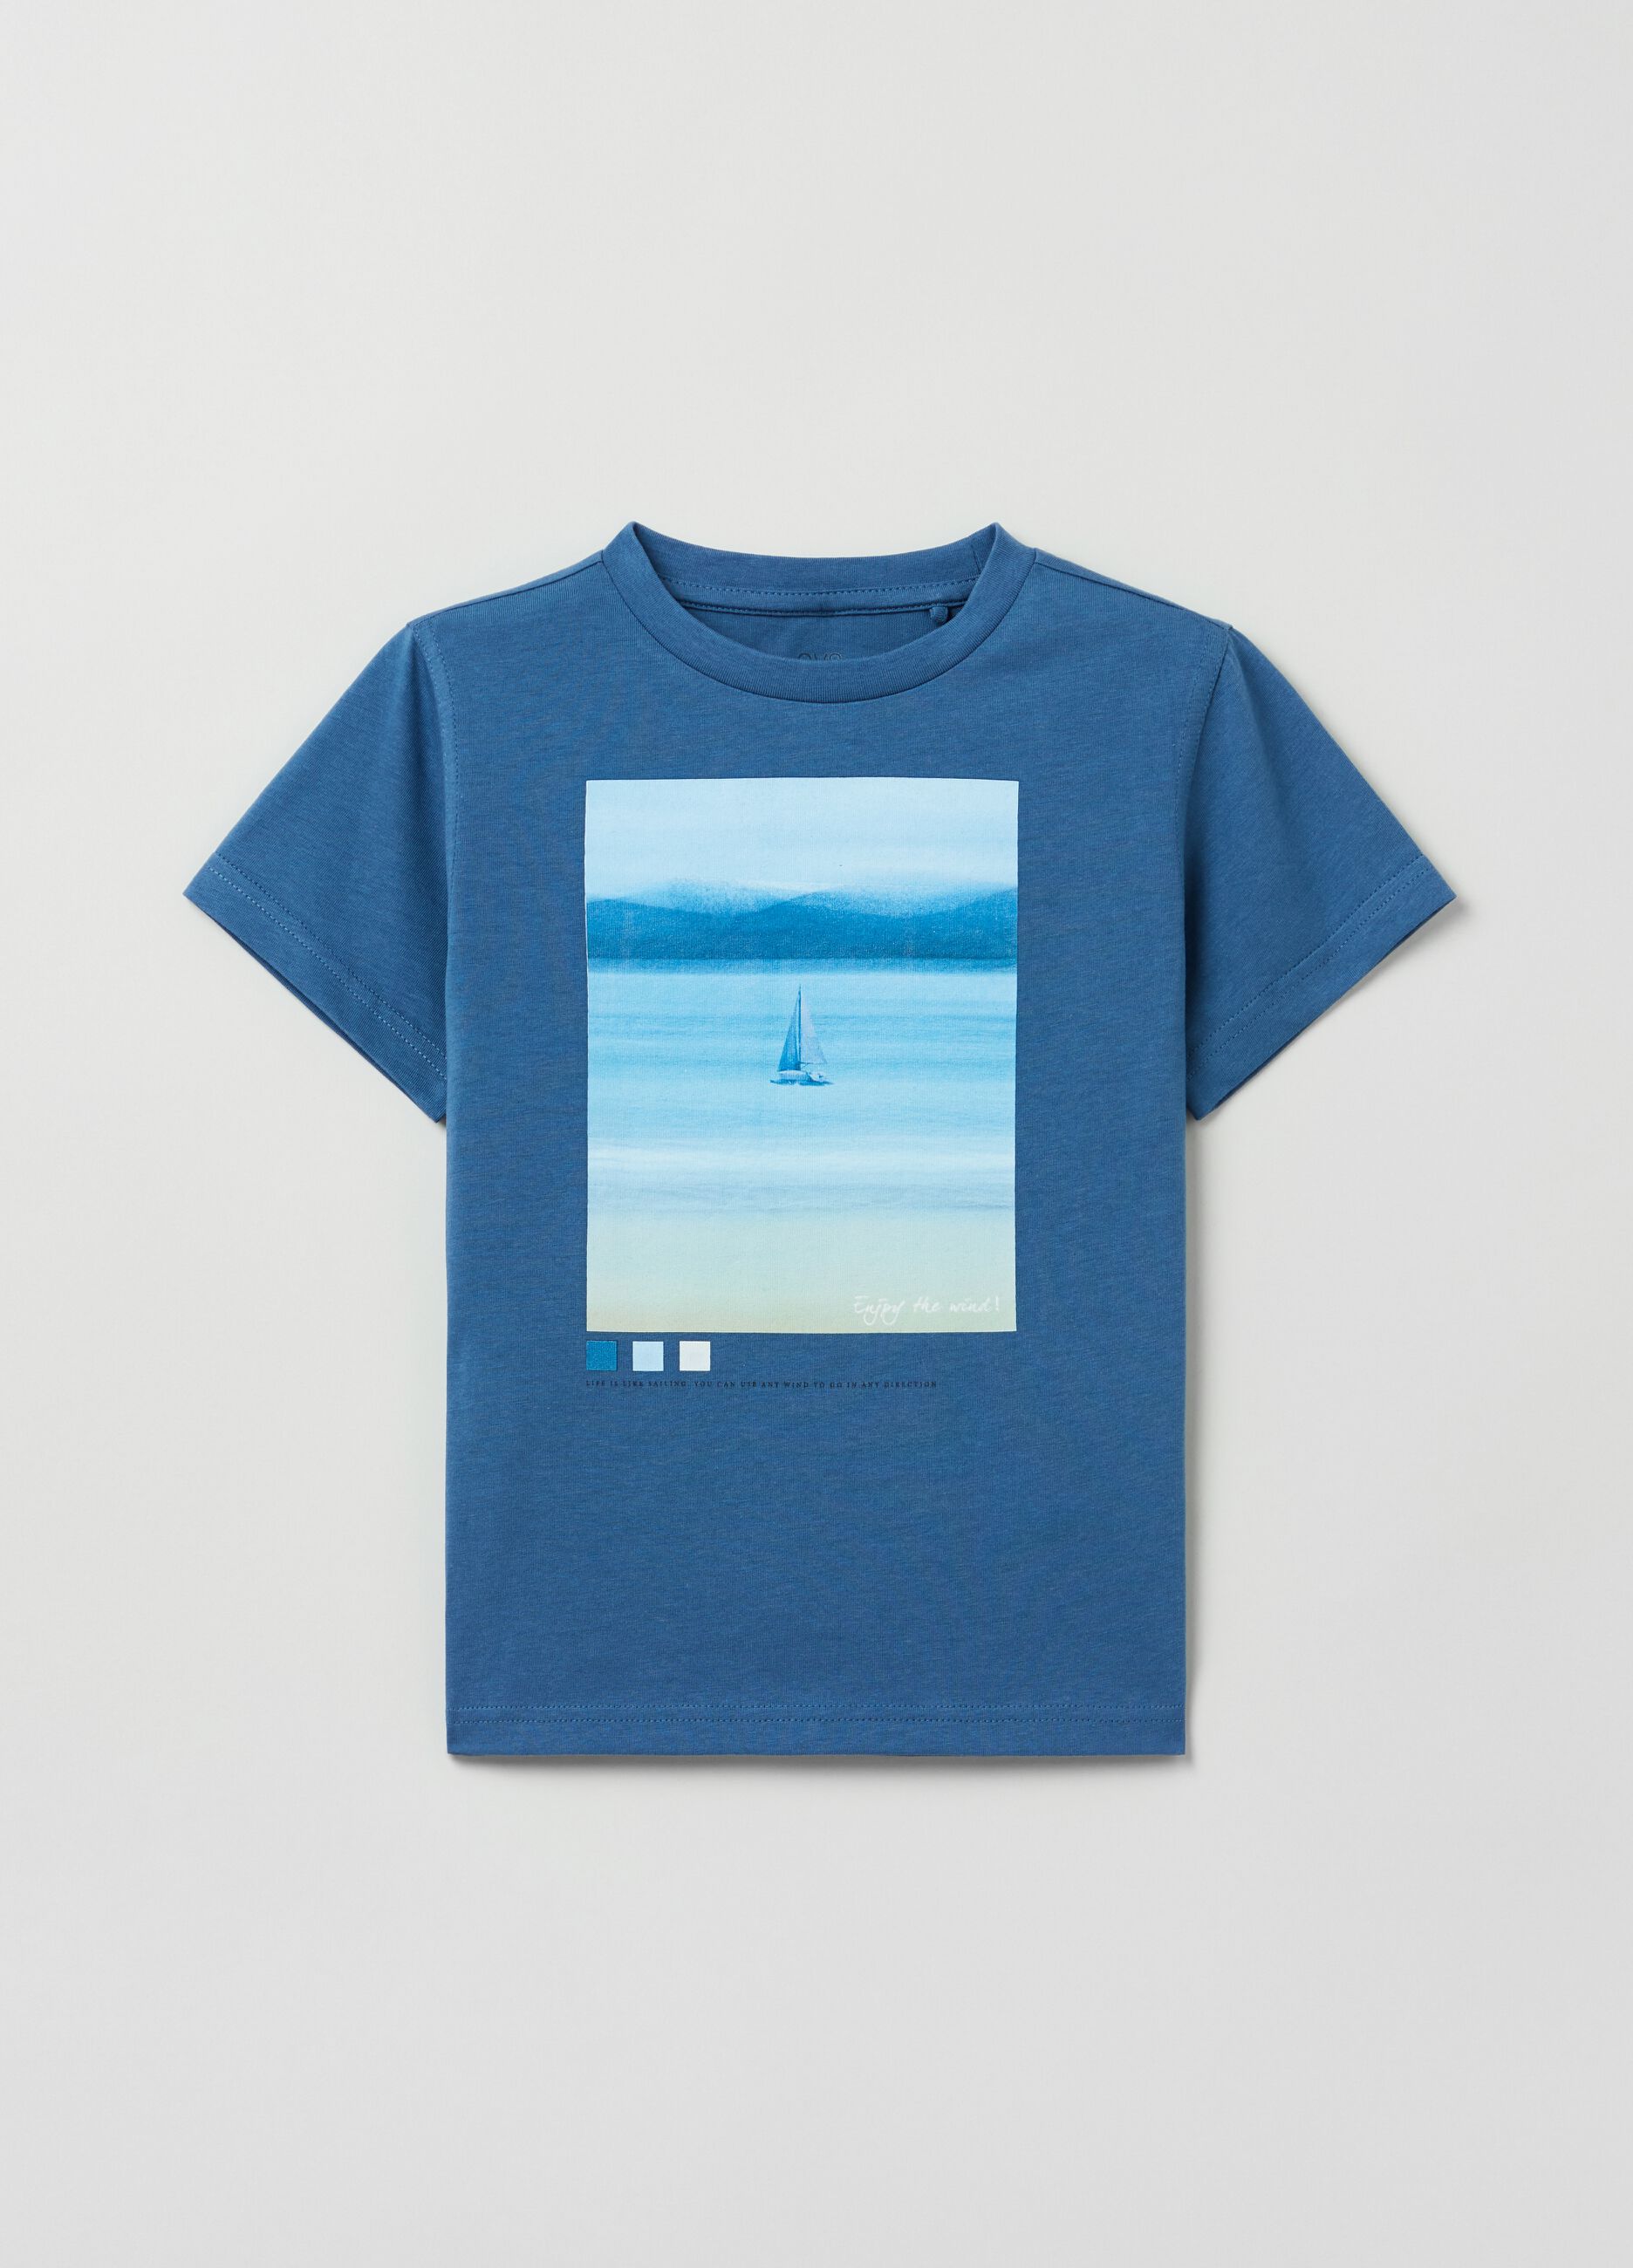 Cotton T-shirt with sailing boat print